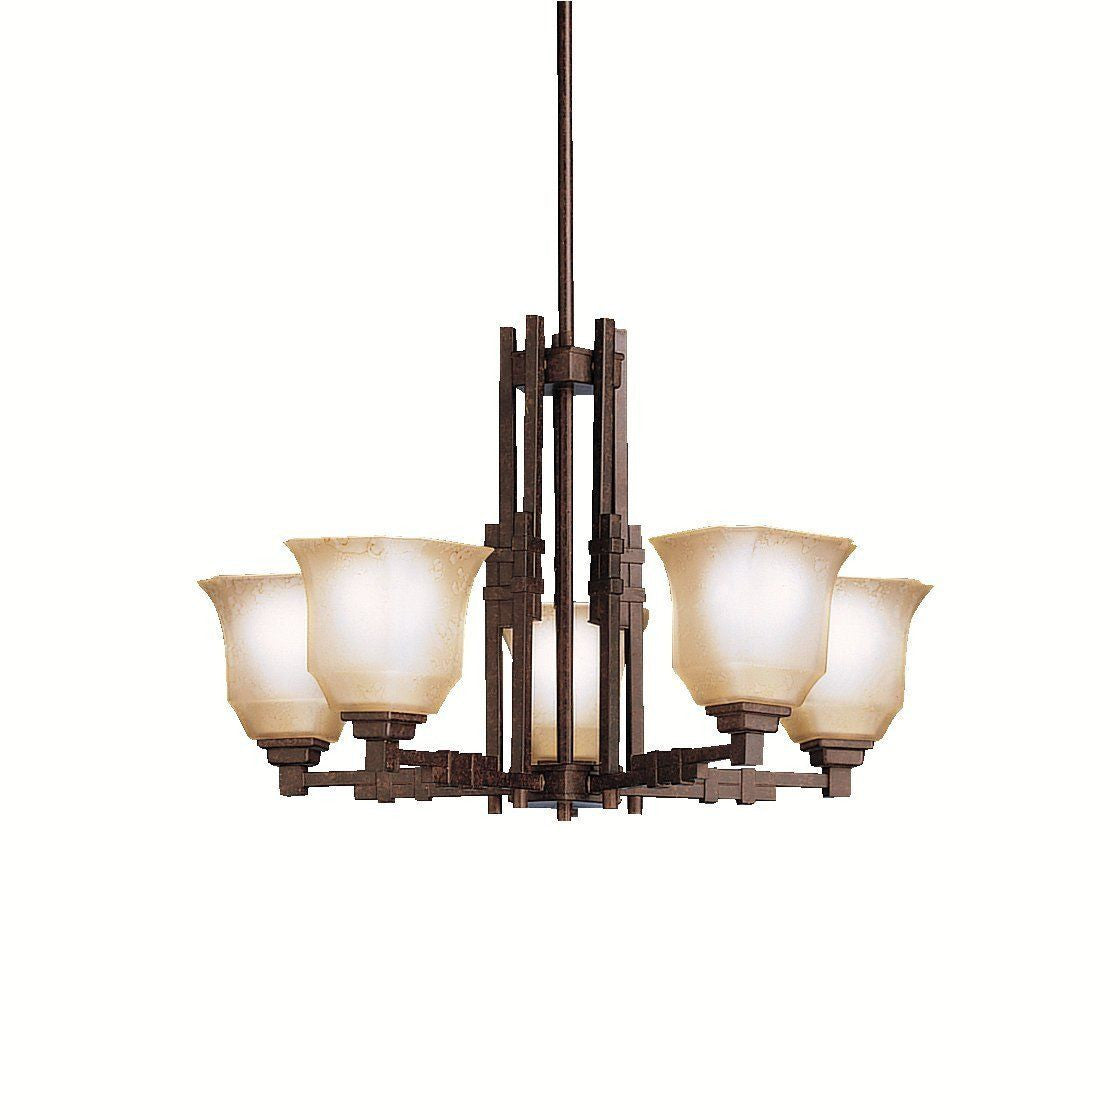 Aztec 34903 by Kichler Lighting Silverton Collection Five Light Hanging Chandelier in Tannery Bronze Finish